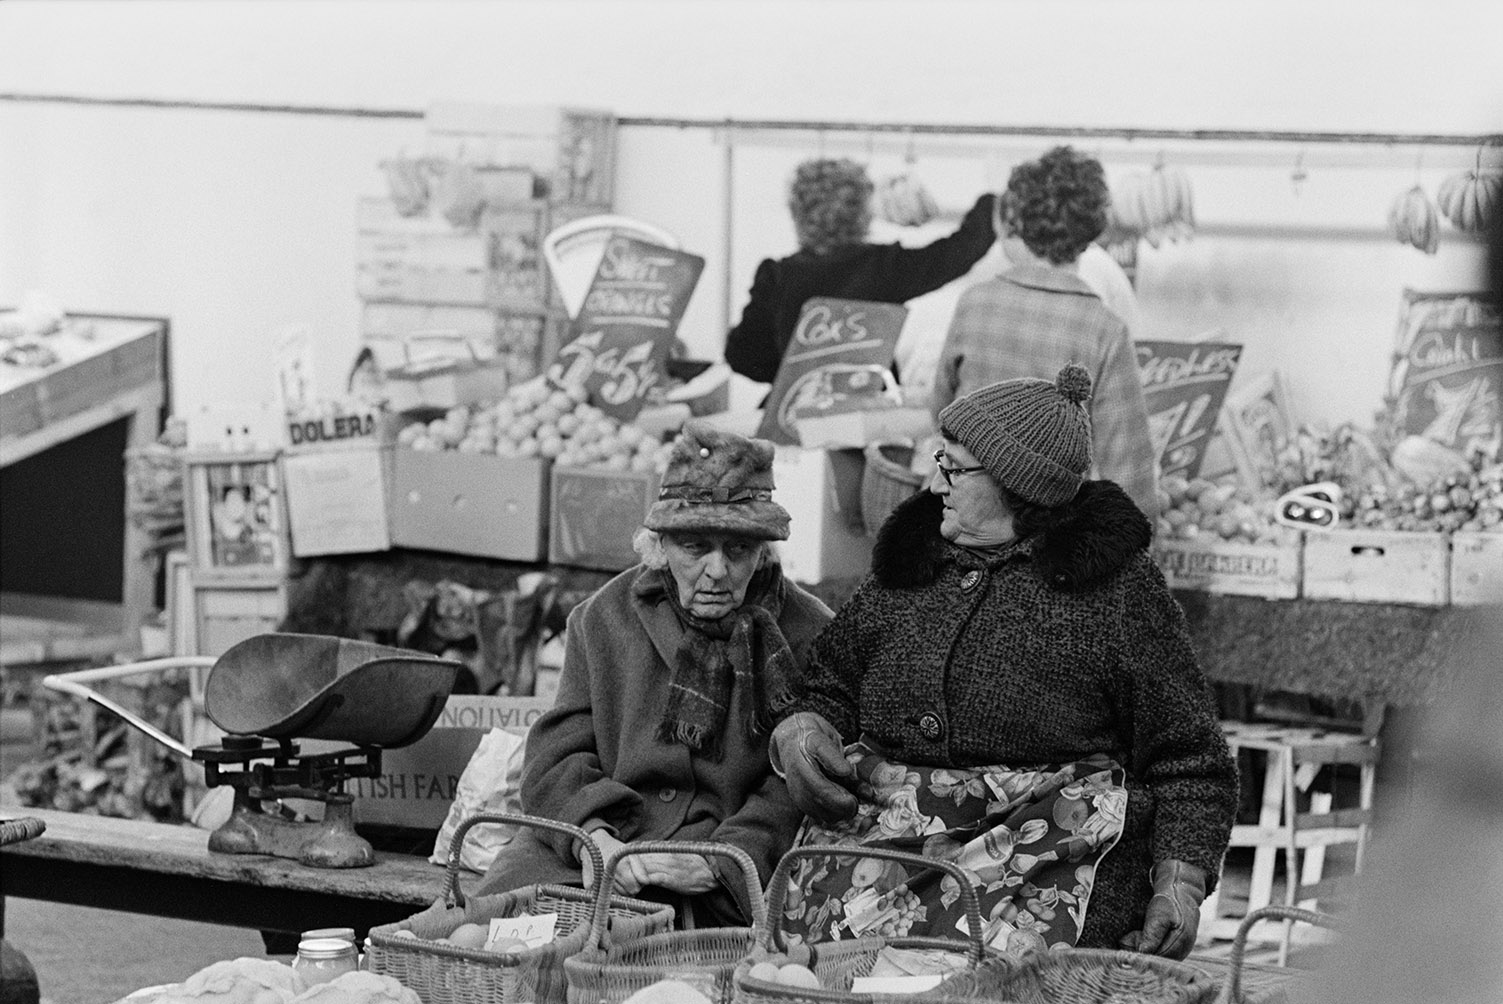 Two women sat down talking and running a stall at Barnstaple Pannier Market. Their good are in baskets in front of them. A stall selling fruit is in the background.